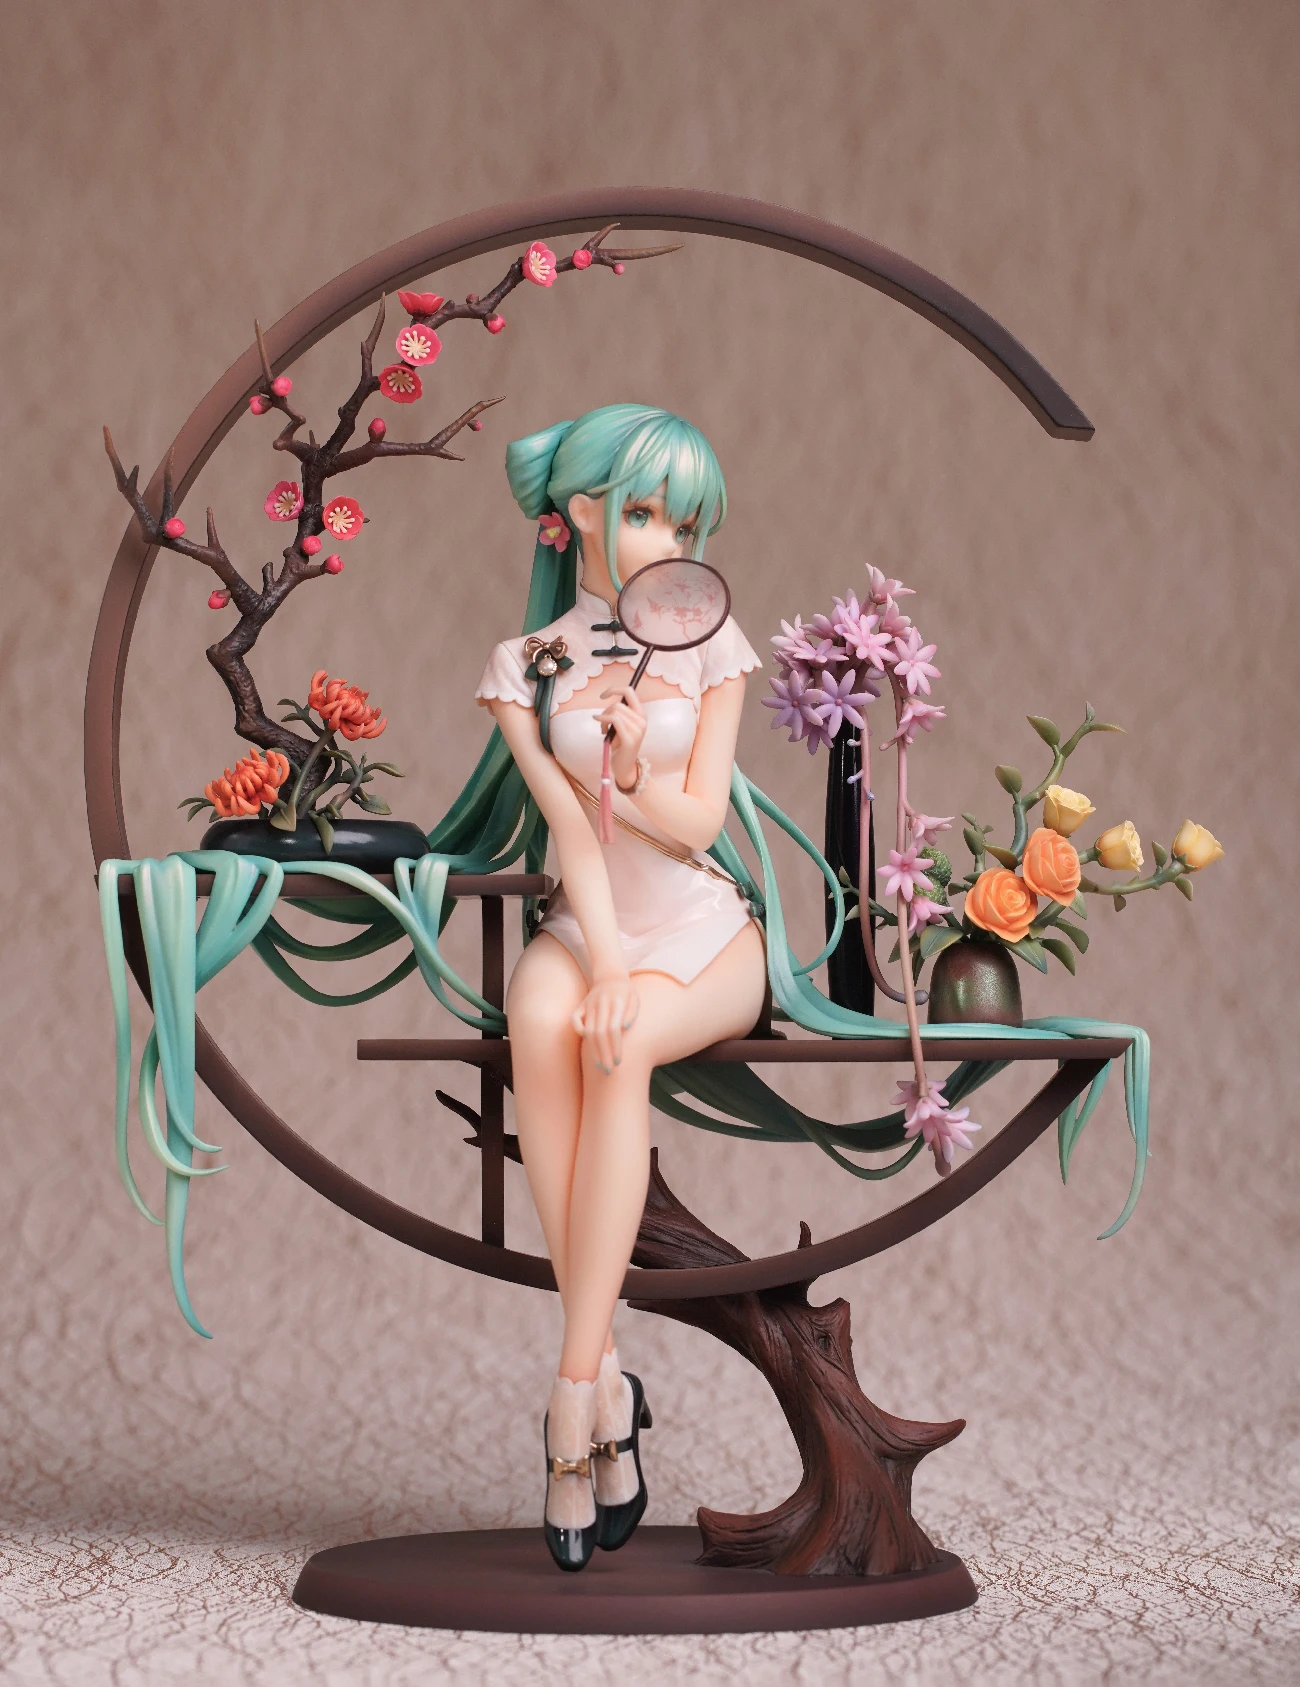 in-stock-original-vocaloid-hatsune-miku-ver-anime-action-collection-figures-model-toys-christmas-gifts-for-kids